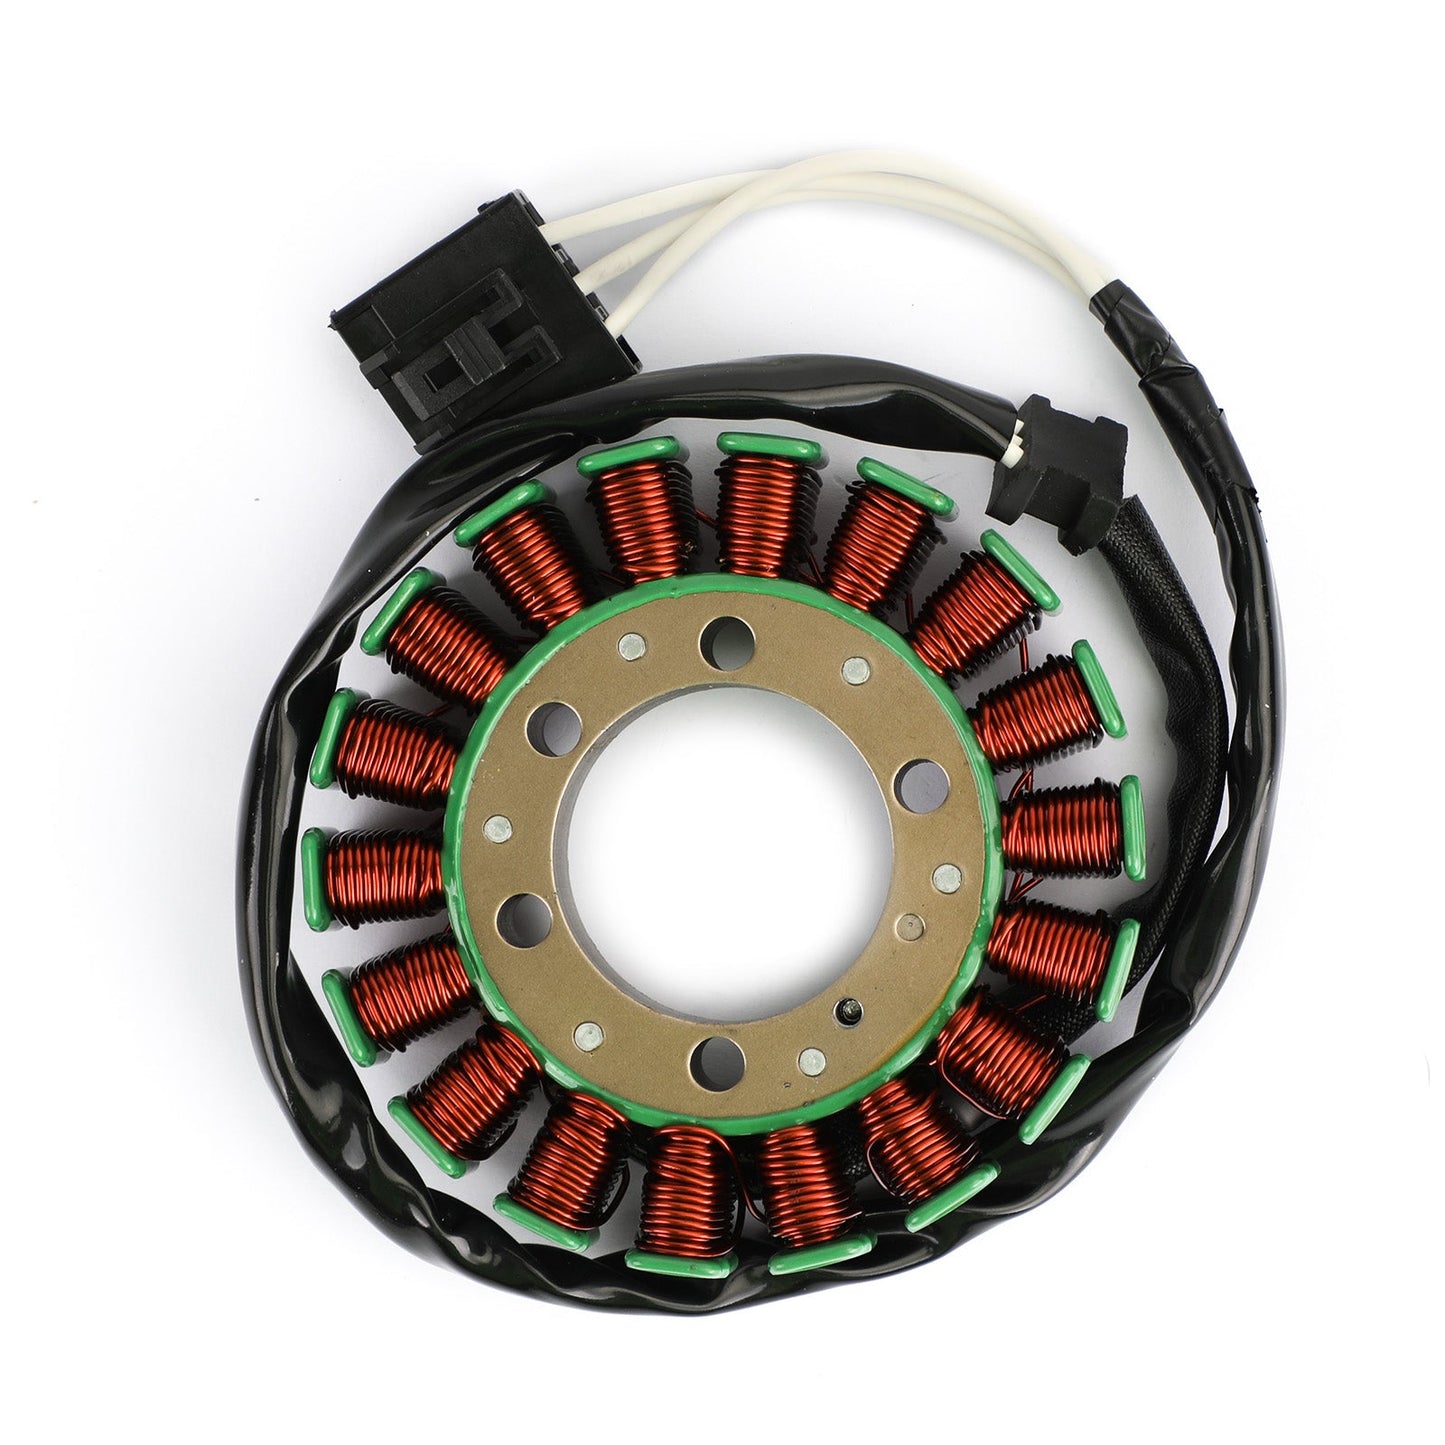 Stator Generator Fit for Kawasaki Z900 / ABS 2017-2020 Versys 1000 2012-2014